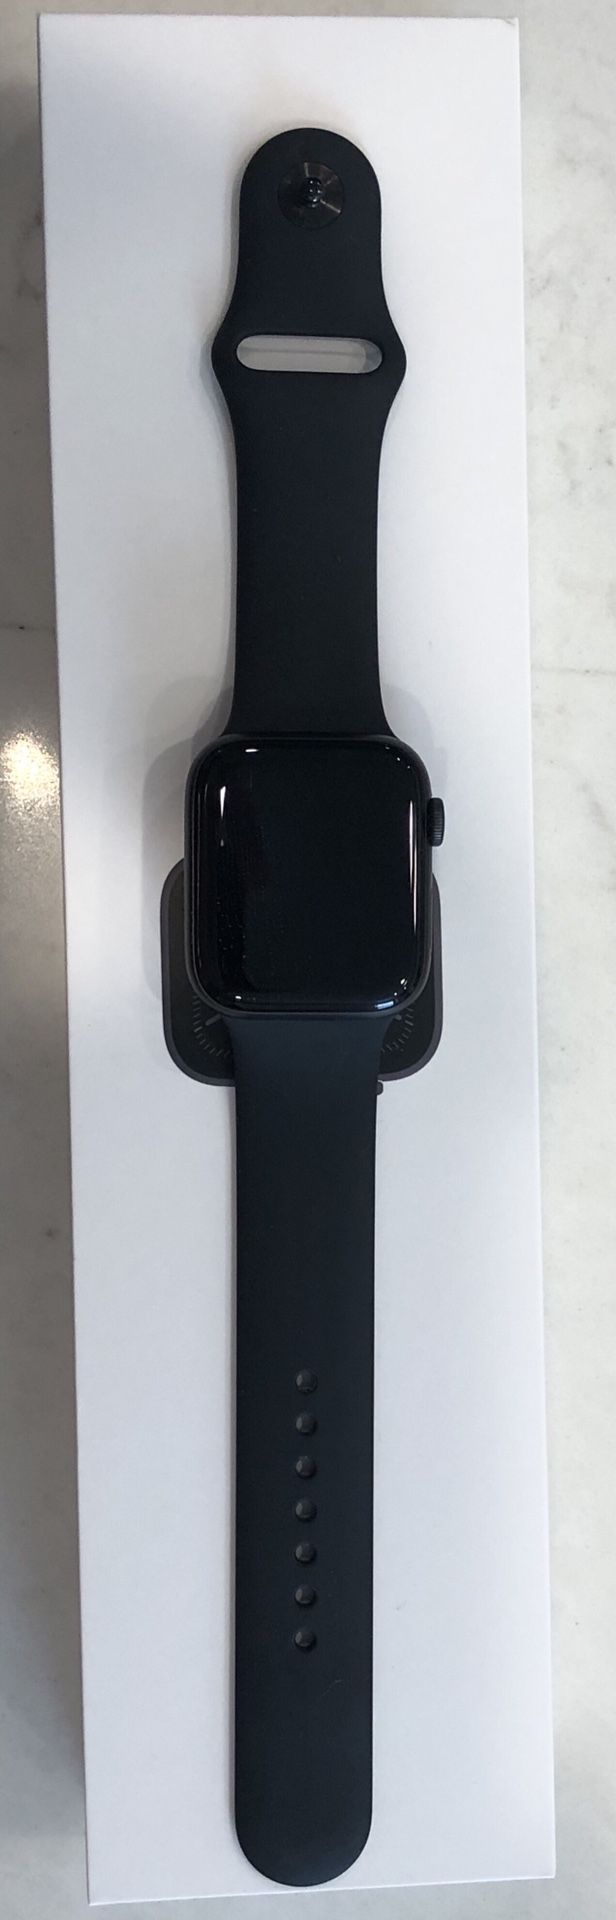 Apple Watch Series 5 GPS + Cellular, 40mm Space Gray Aluminum Case with Black Sport Band